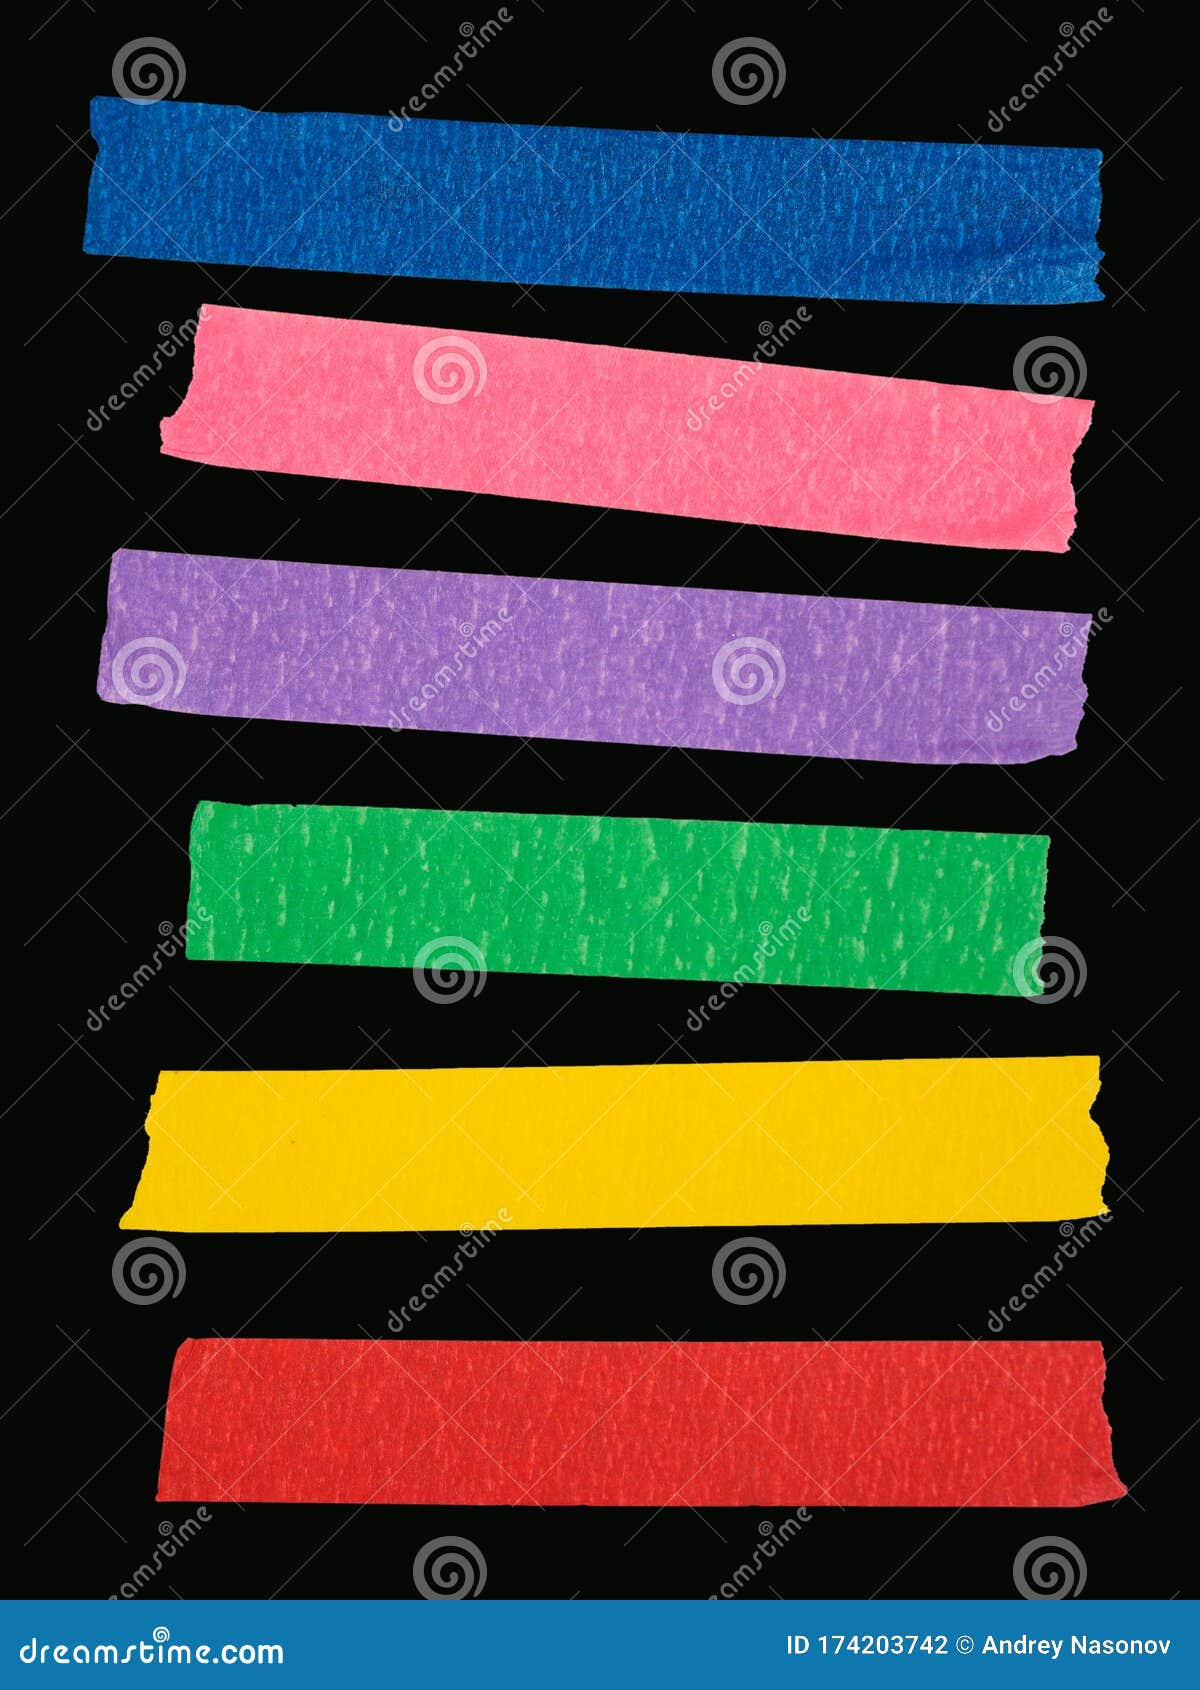 various ripped pieces of multi color masking tape